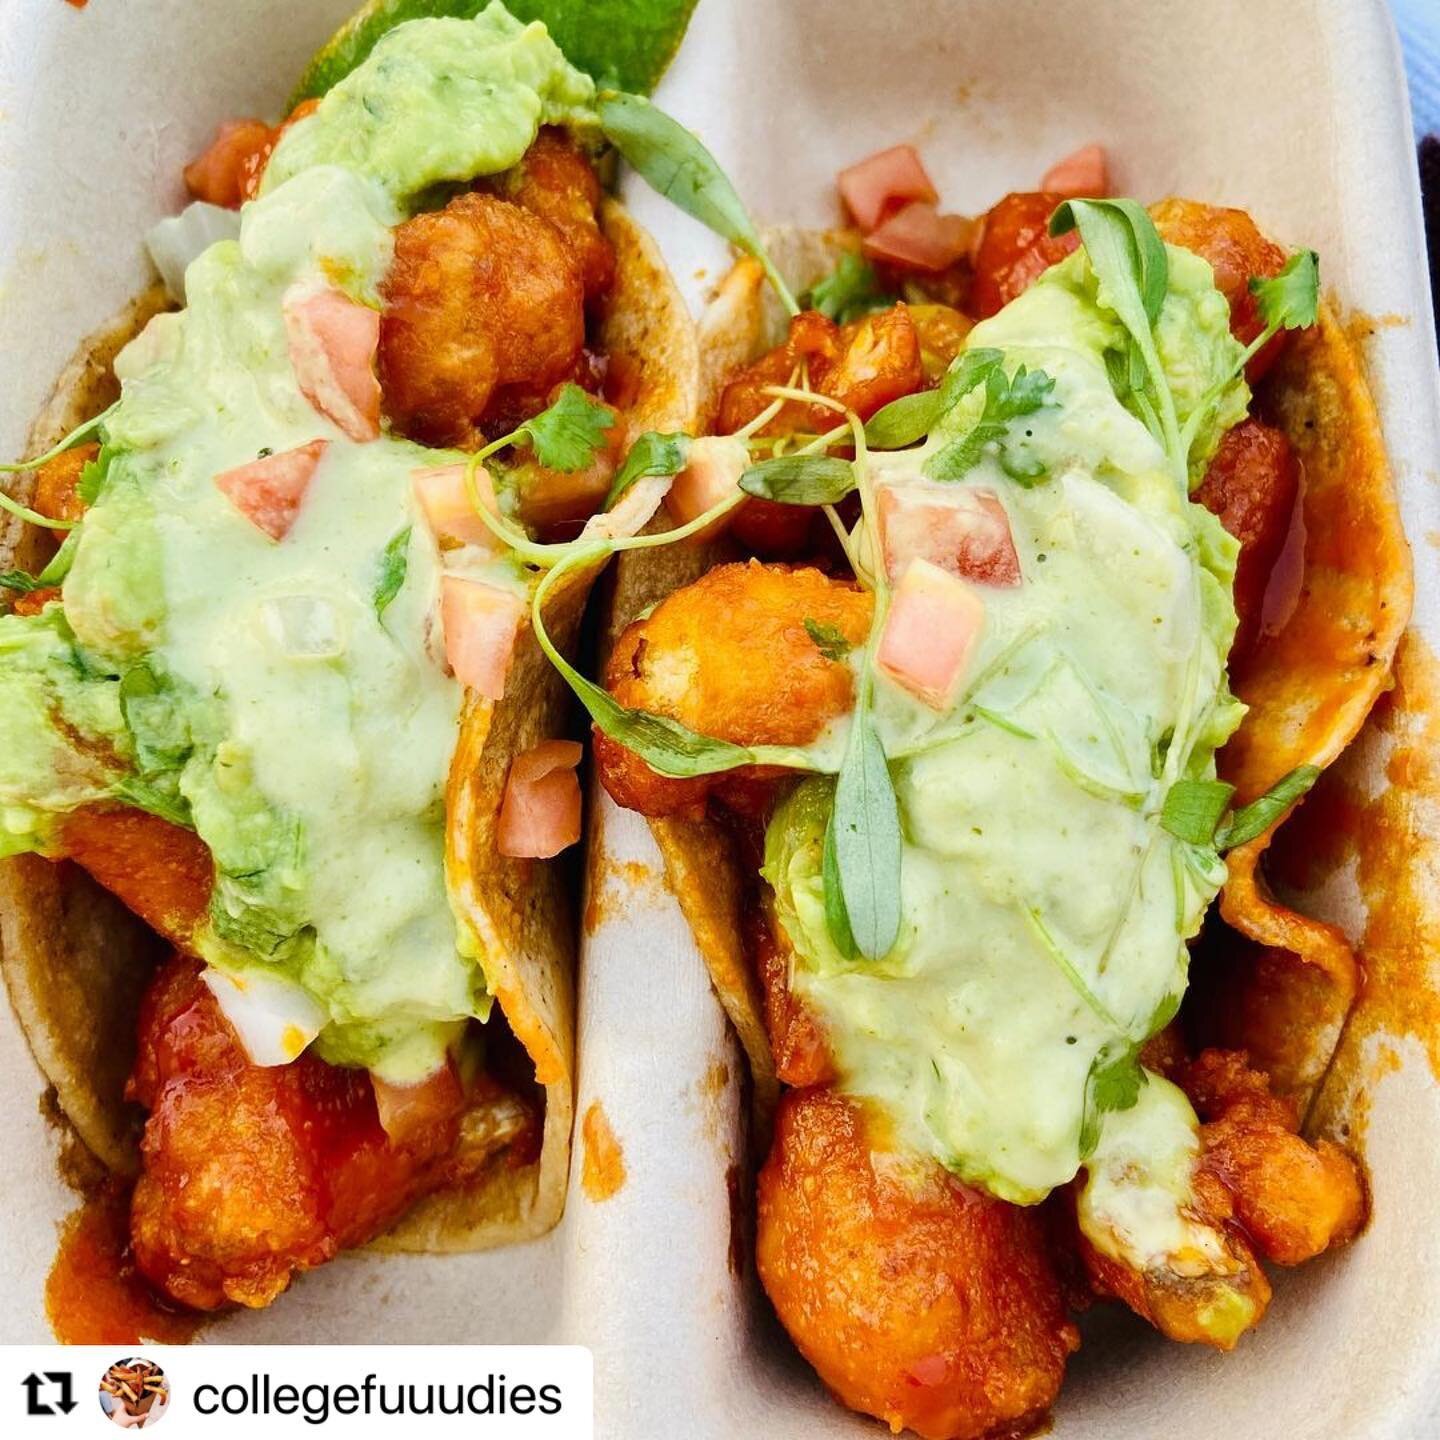 Look at these crispy cauliflower tacos shot by @collegefuuudies ! Topped with guacamole &amp; our jalae&ntilde;o aioli, these flavorful tacos are delicious.